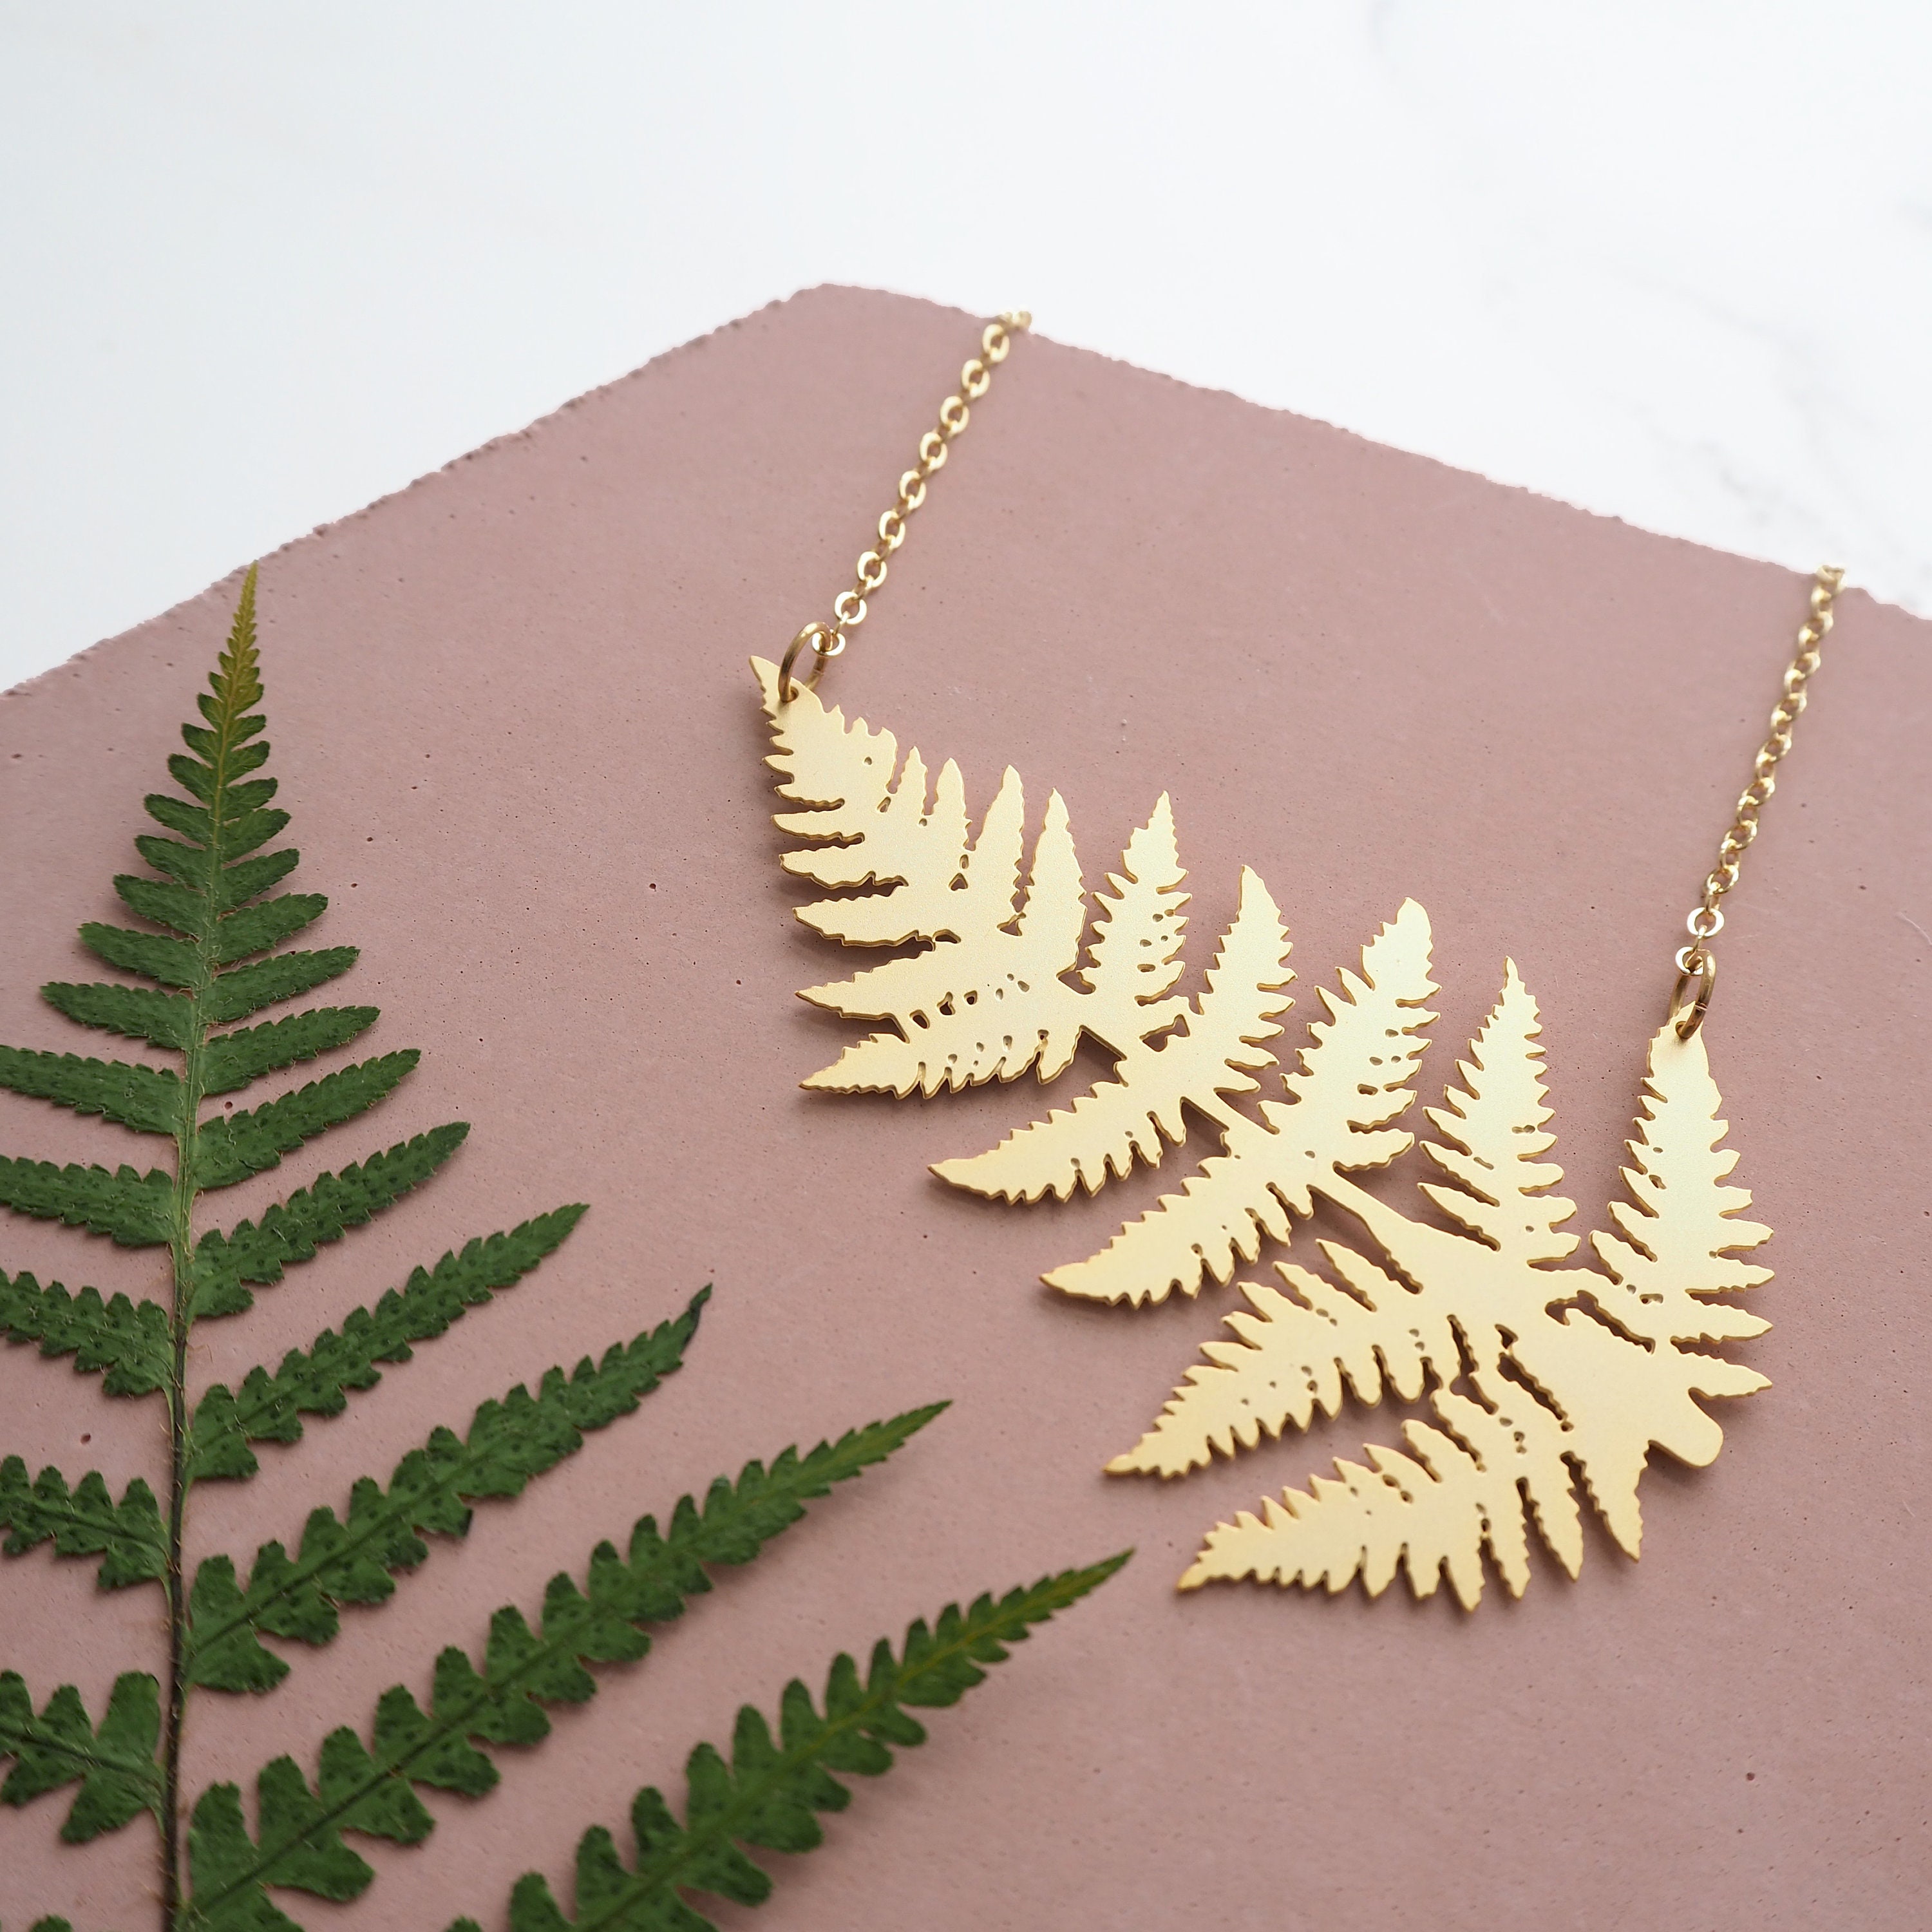 Fern Statement Necklace - Gold Leaf Pendant Jewellery Plant Gift For Her